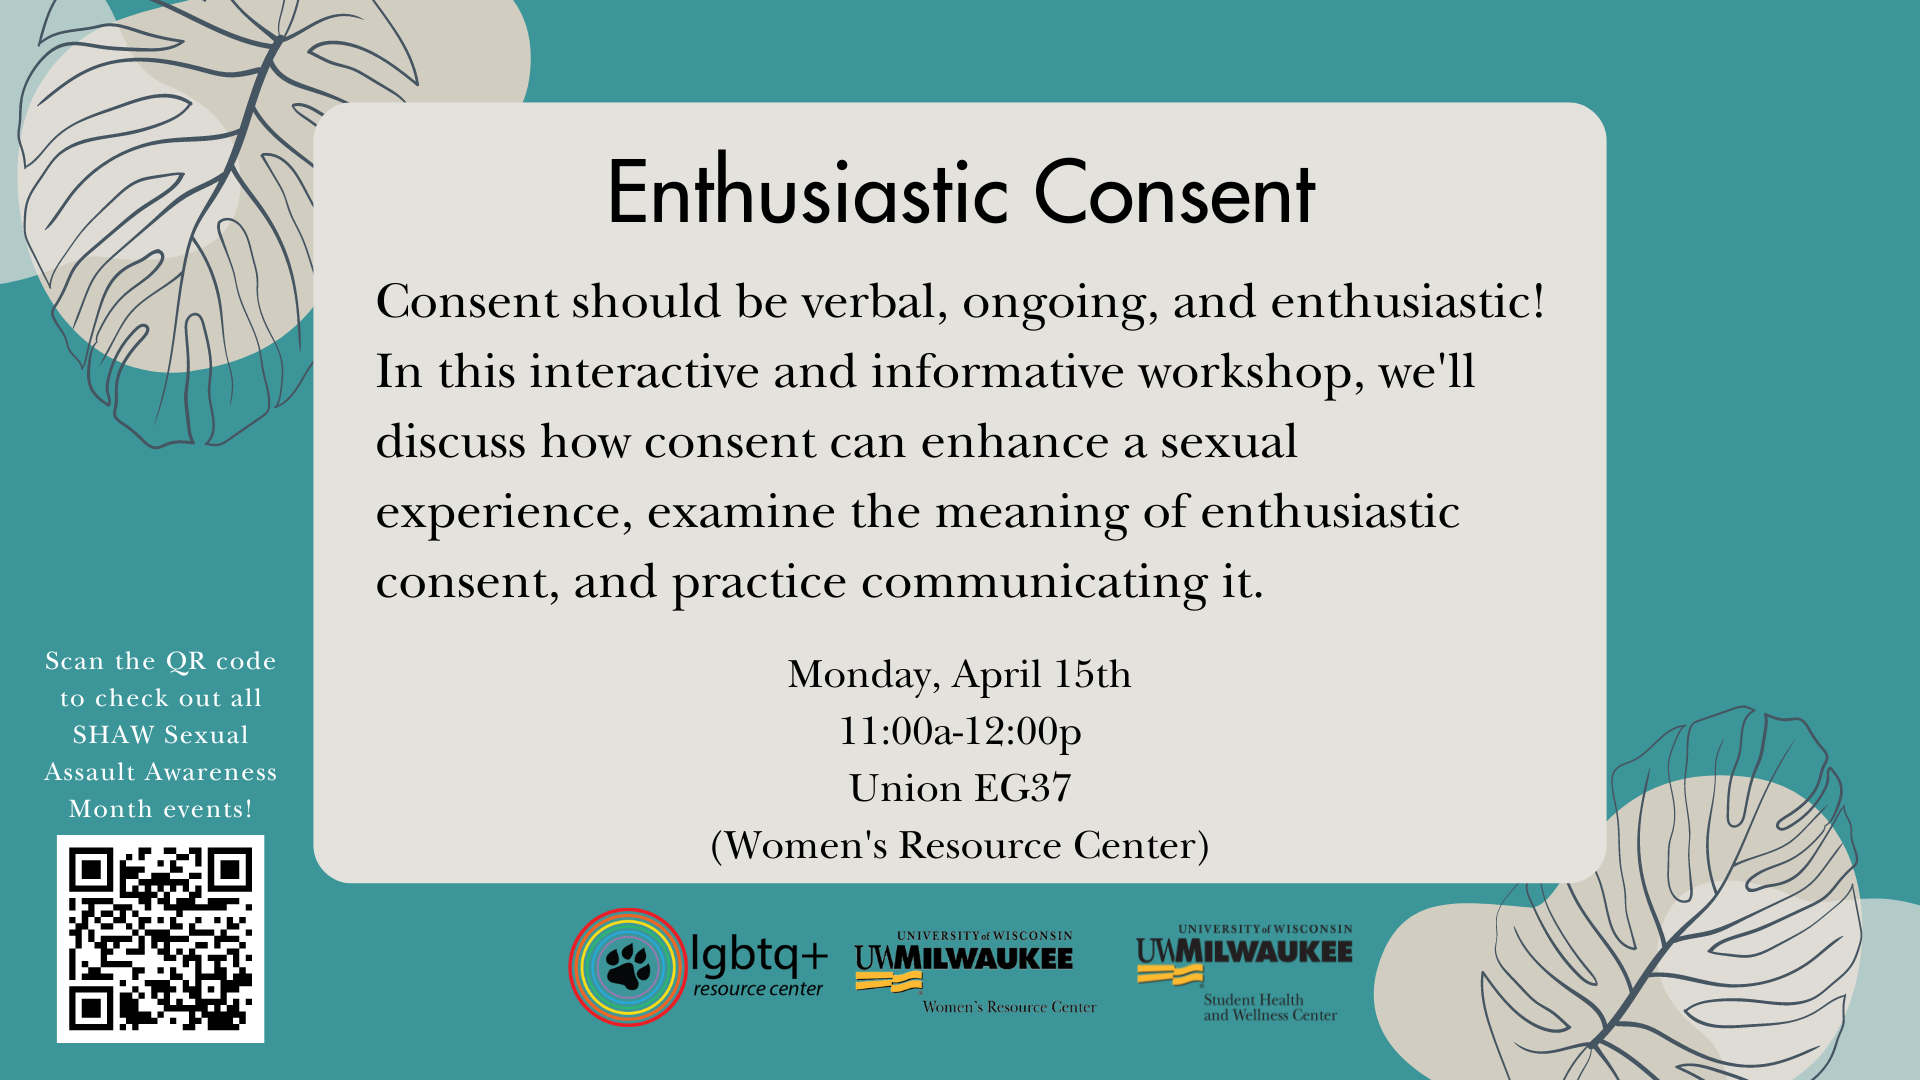 A graphic providing information about an event focused on enthusiastic consent